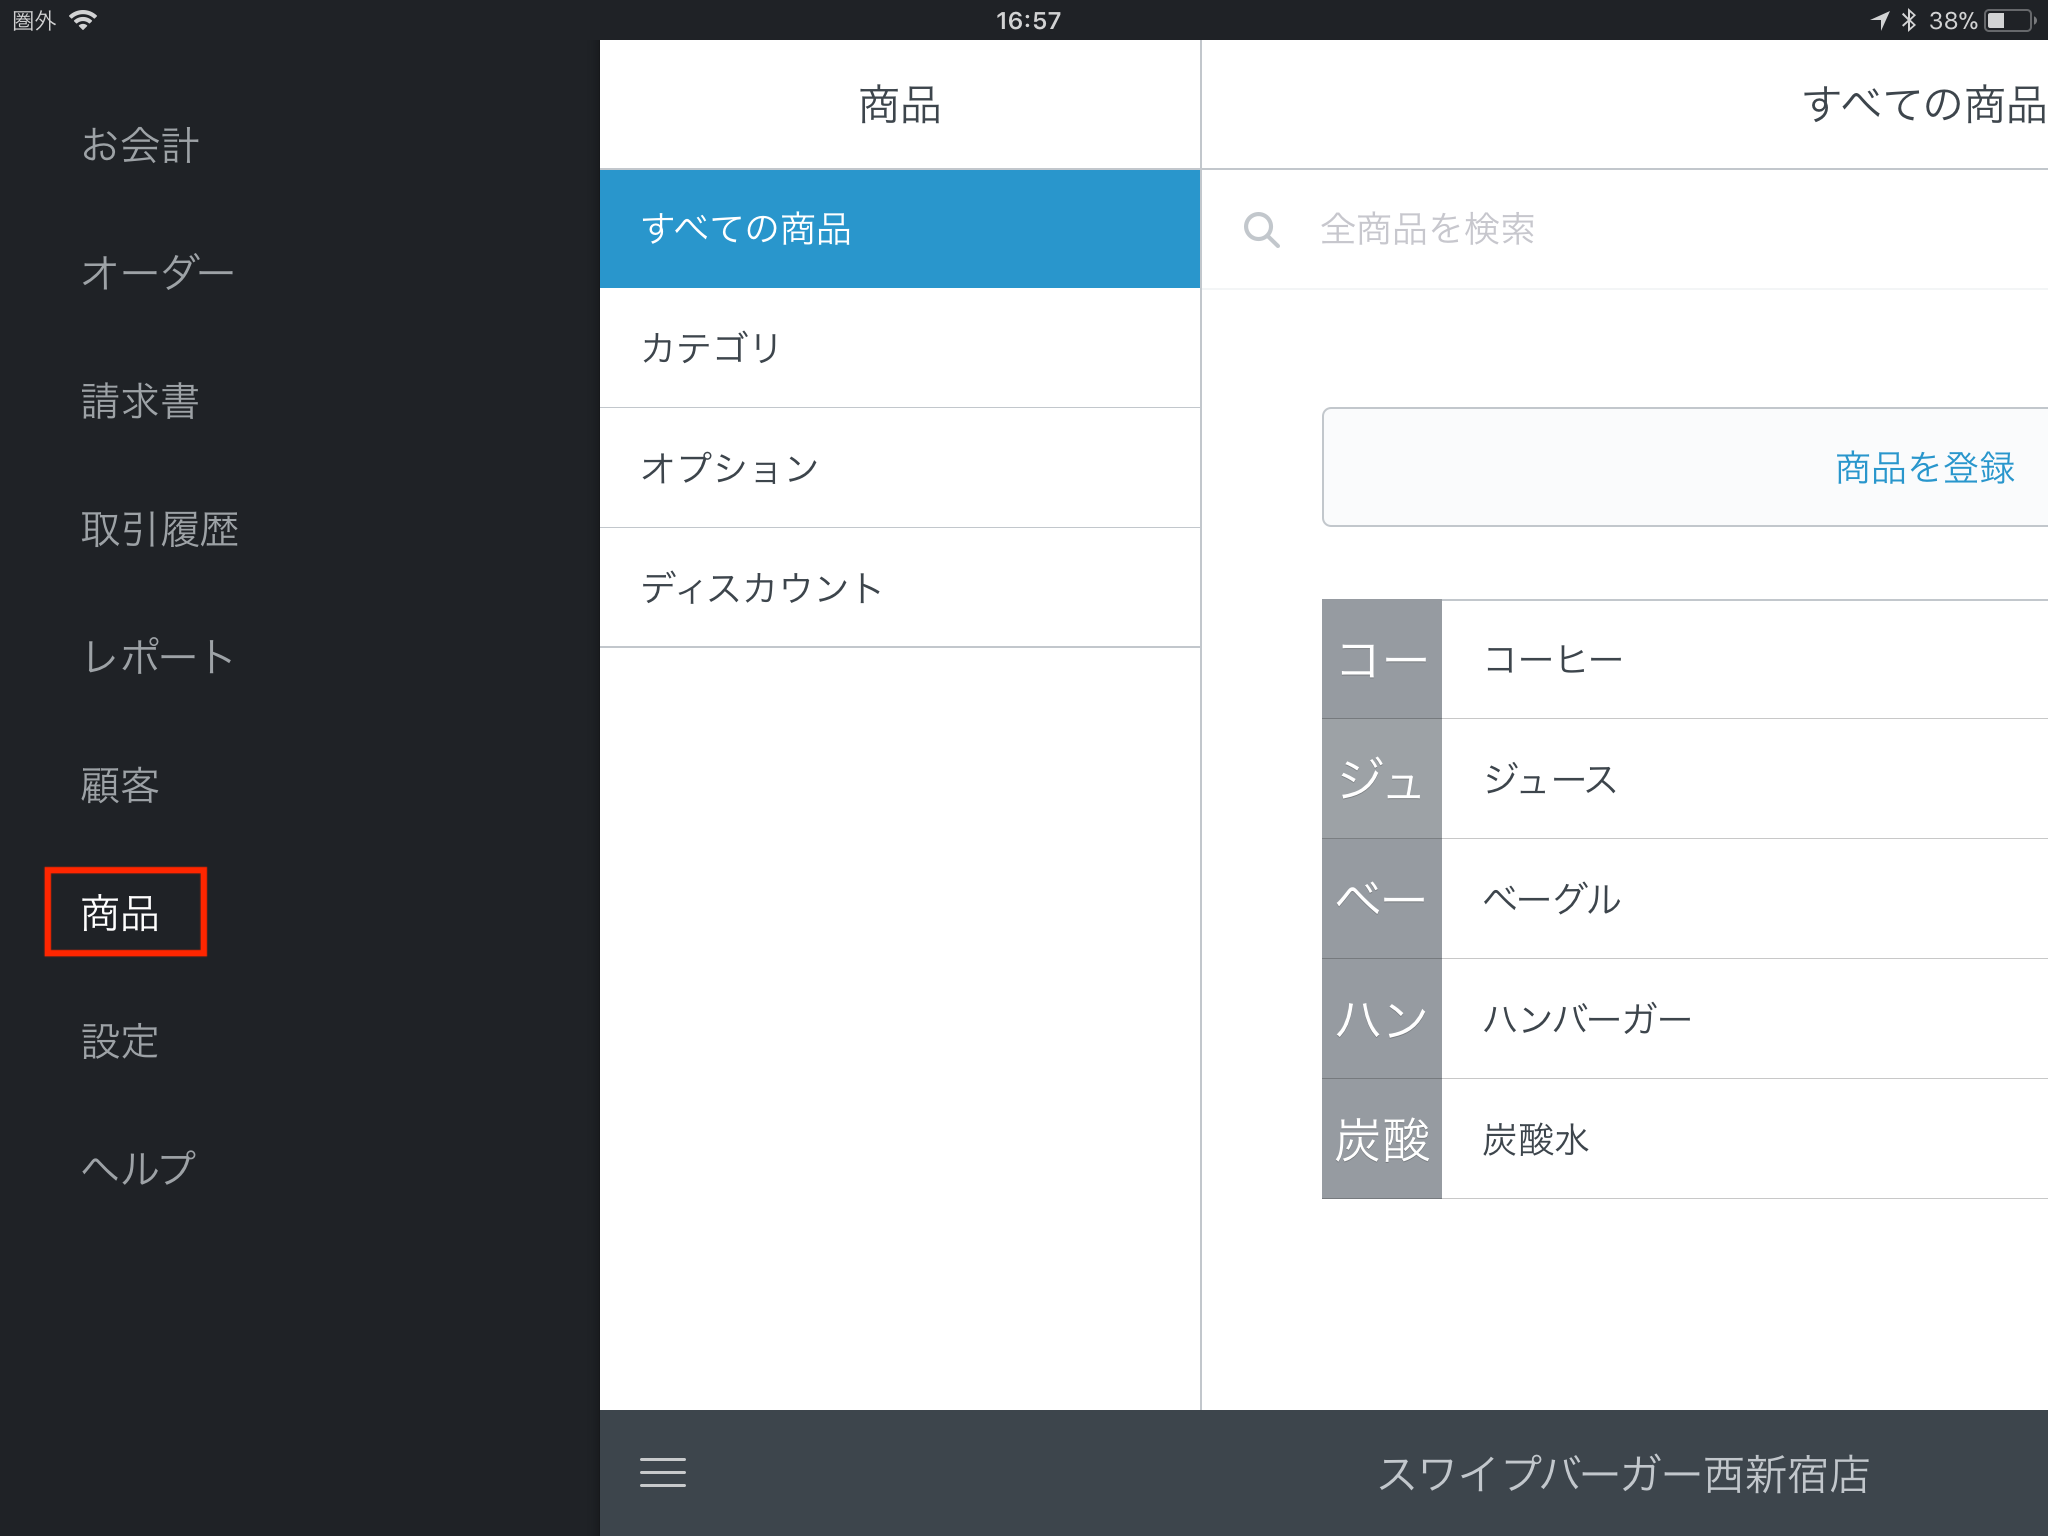 JP Only Edit Inventory in iPad_Tap Items